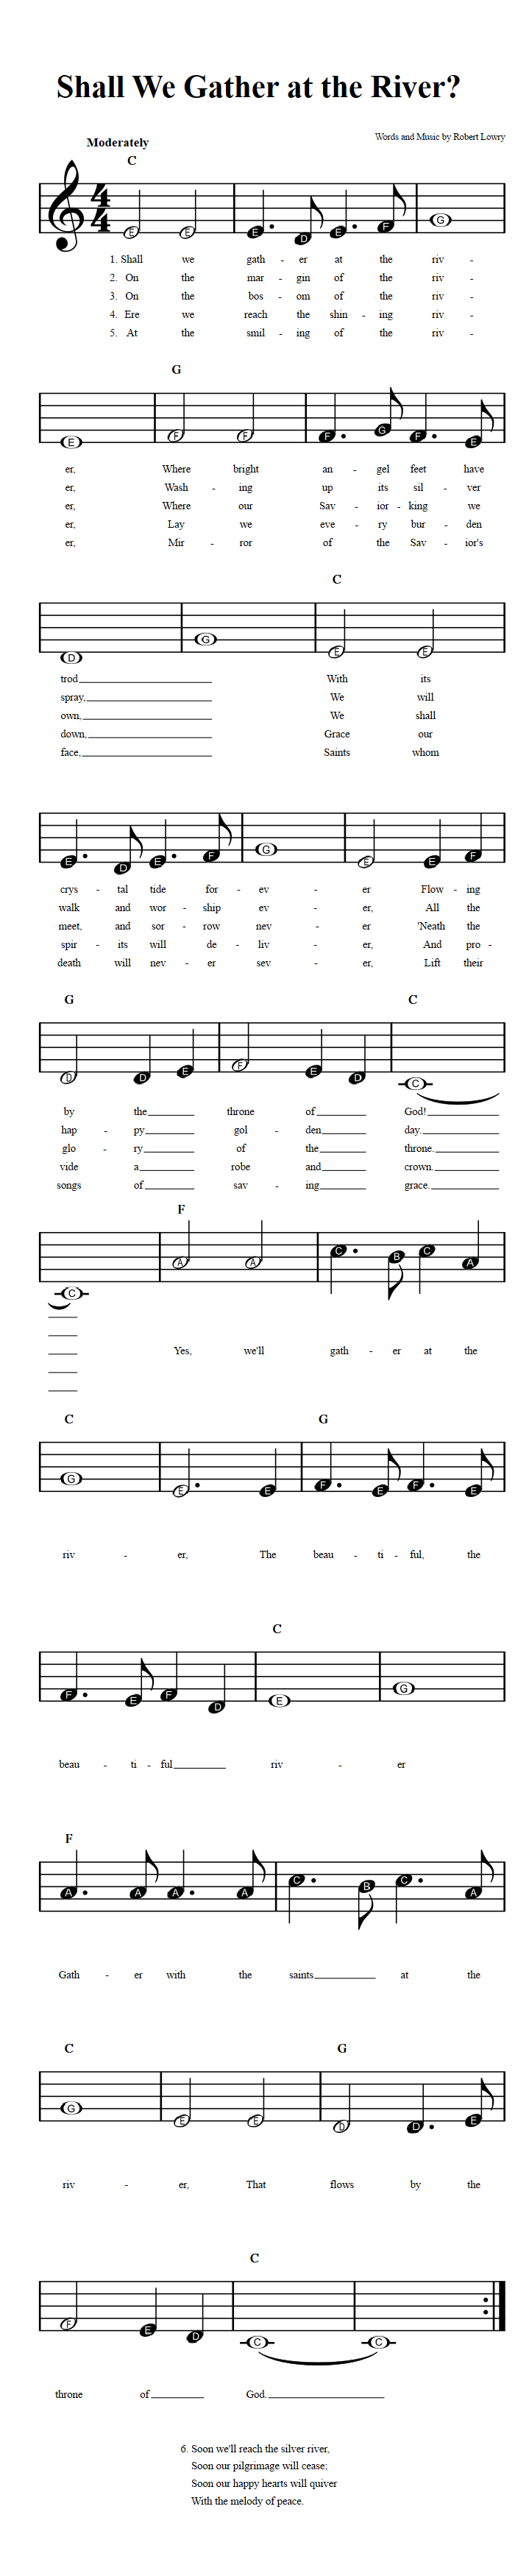 Shall We Gather at the River?  Beginner Sheet Music